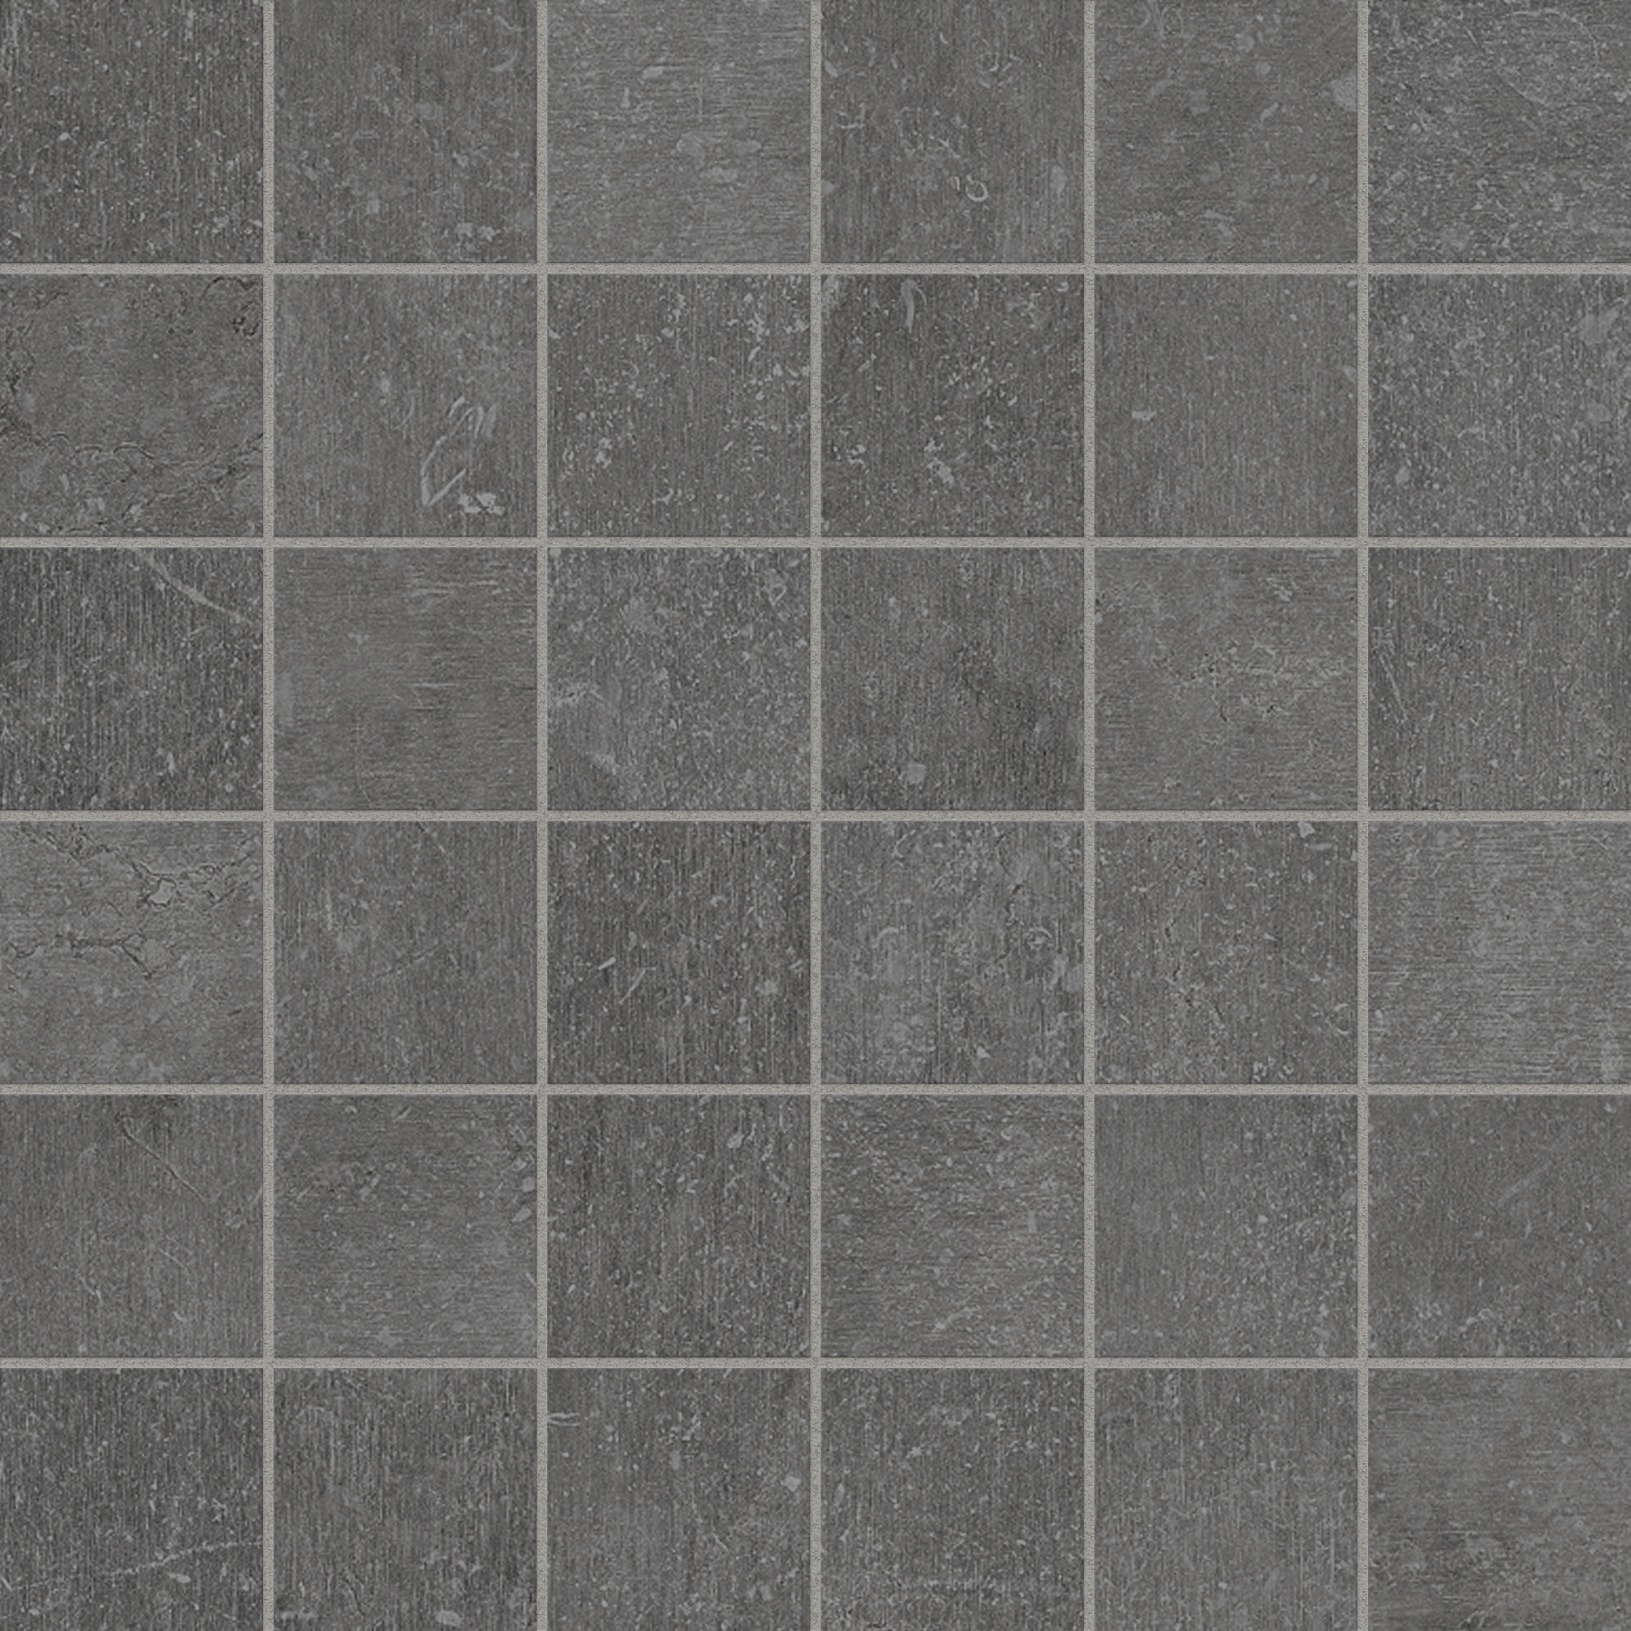 graphite straight stack 2x2-inch pattern glazed porcelain mosaic from nexus anatolia collection distributed by surface group international matte finish straight edge edge mesh shape